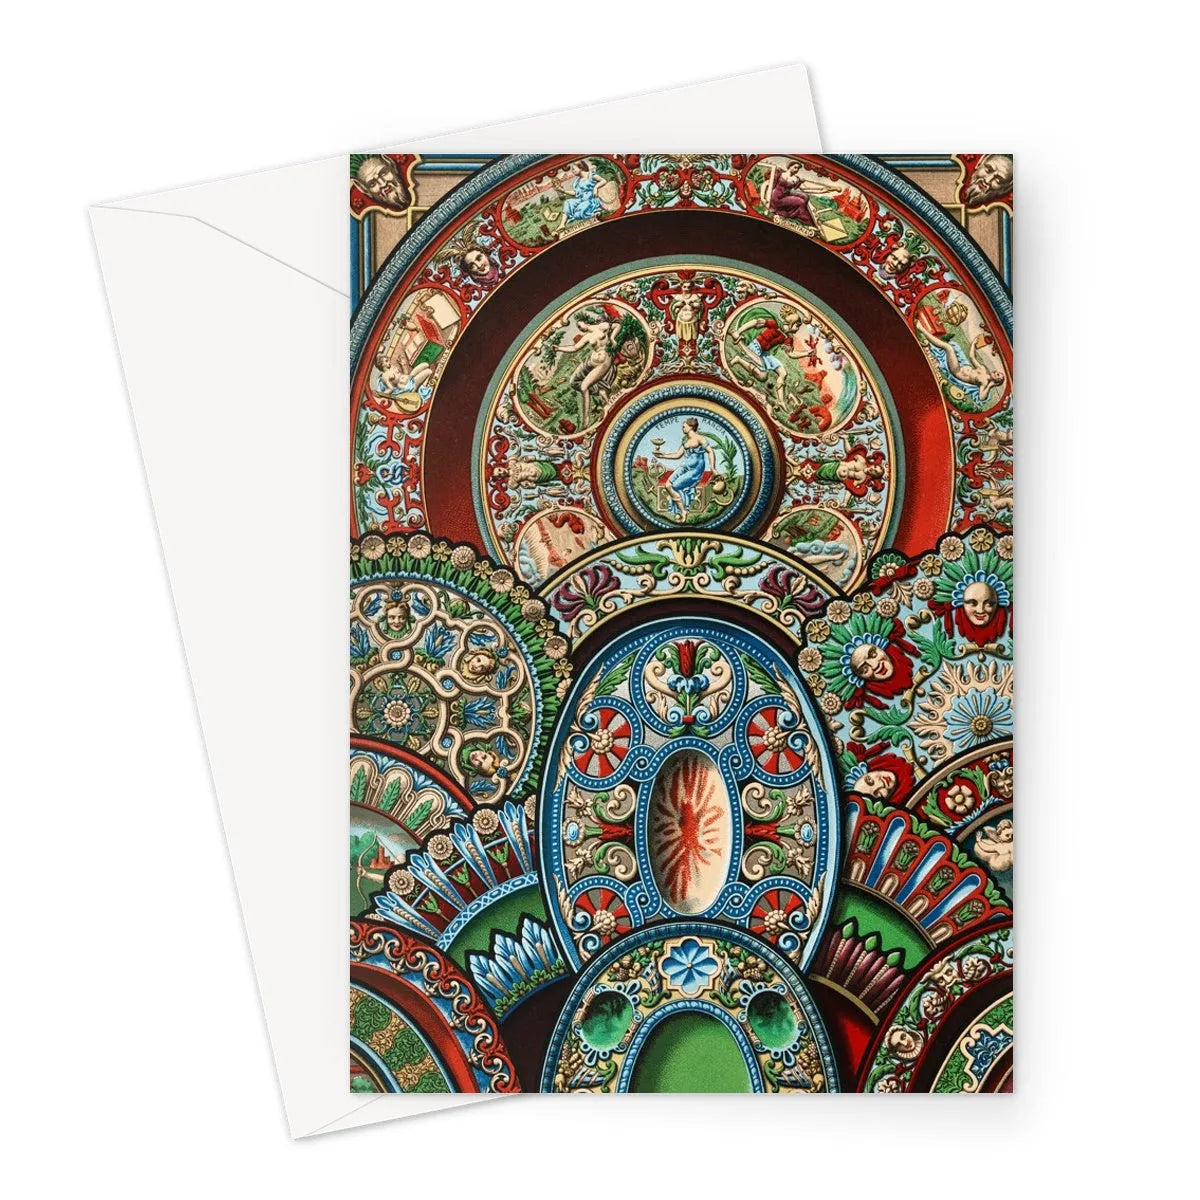 Renaissance Pattern By Auguste Racinet Greeting Card - A5 Portrait / 1 Card - Greeting & Note Cards - Aesthetic Art